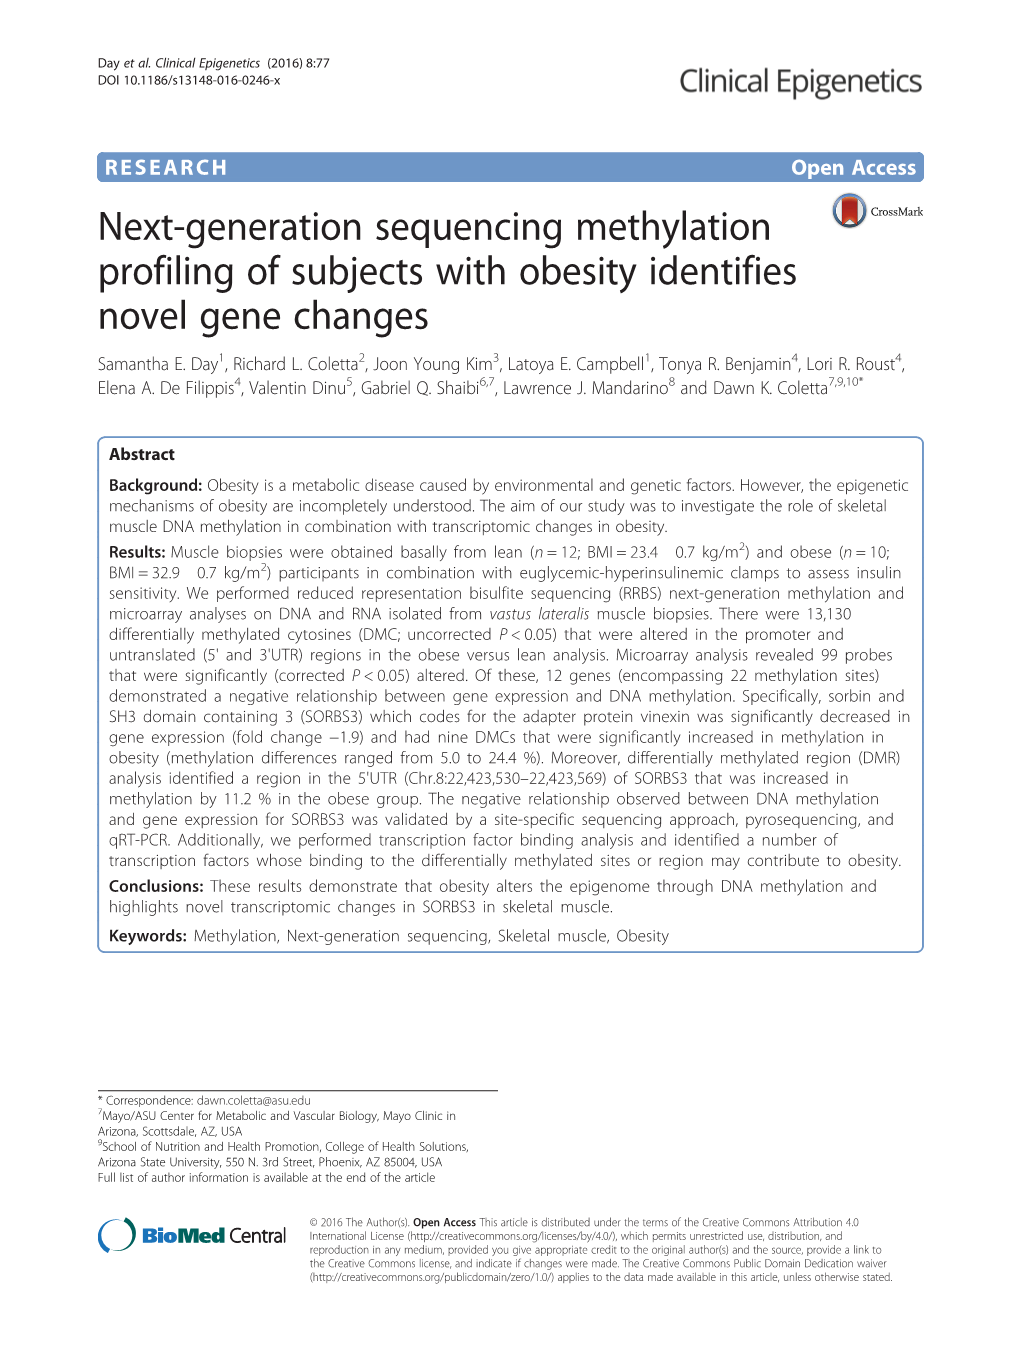 Next-Generation Sequencing Methylation Profiling of Subjects with Obesity Identifies Novel Gene Changes Samantha E